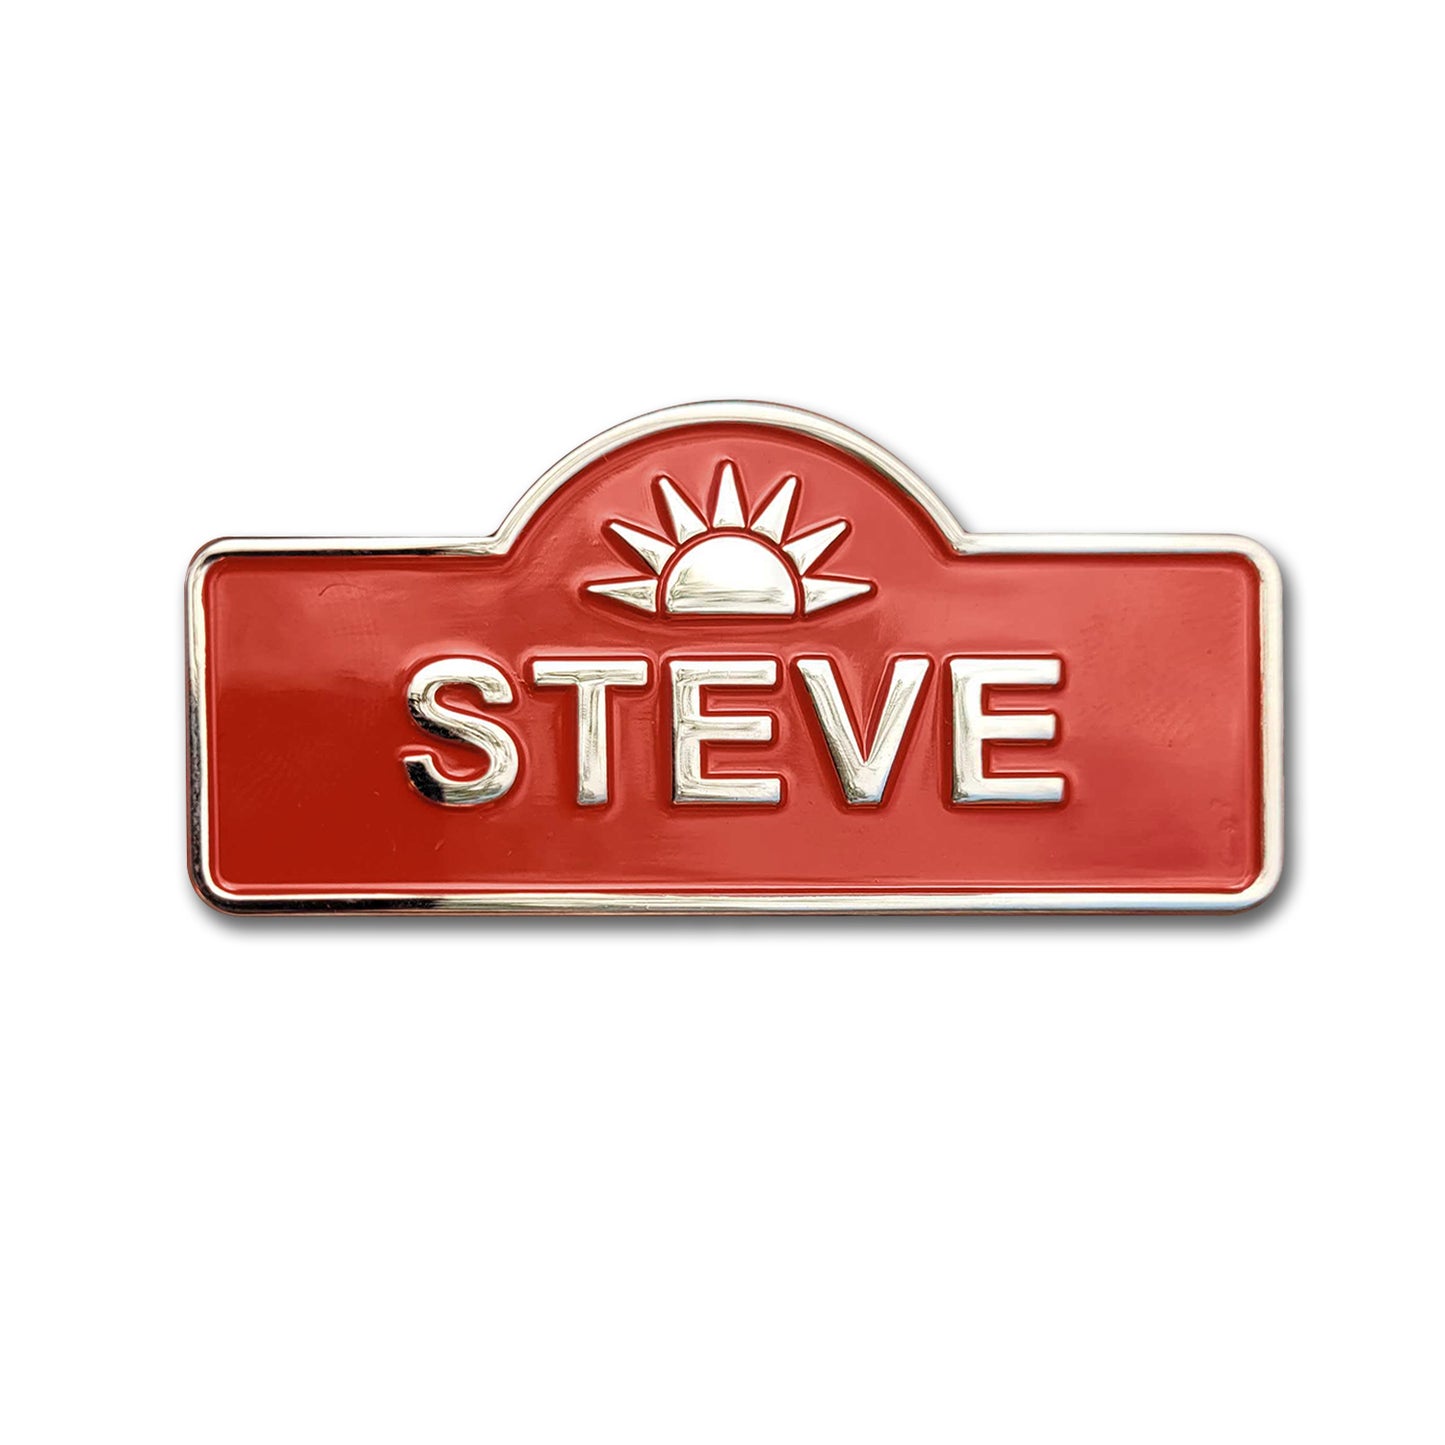 A brass pin in the shape of a name tag. A rising sun is at the top, with the name "STEVE" printed below.